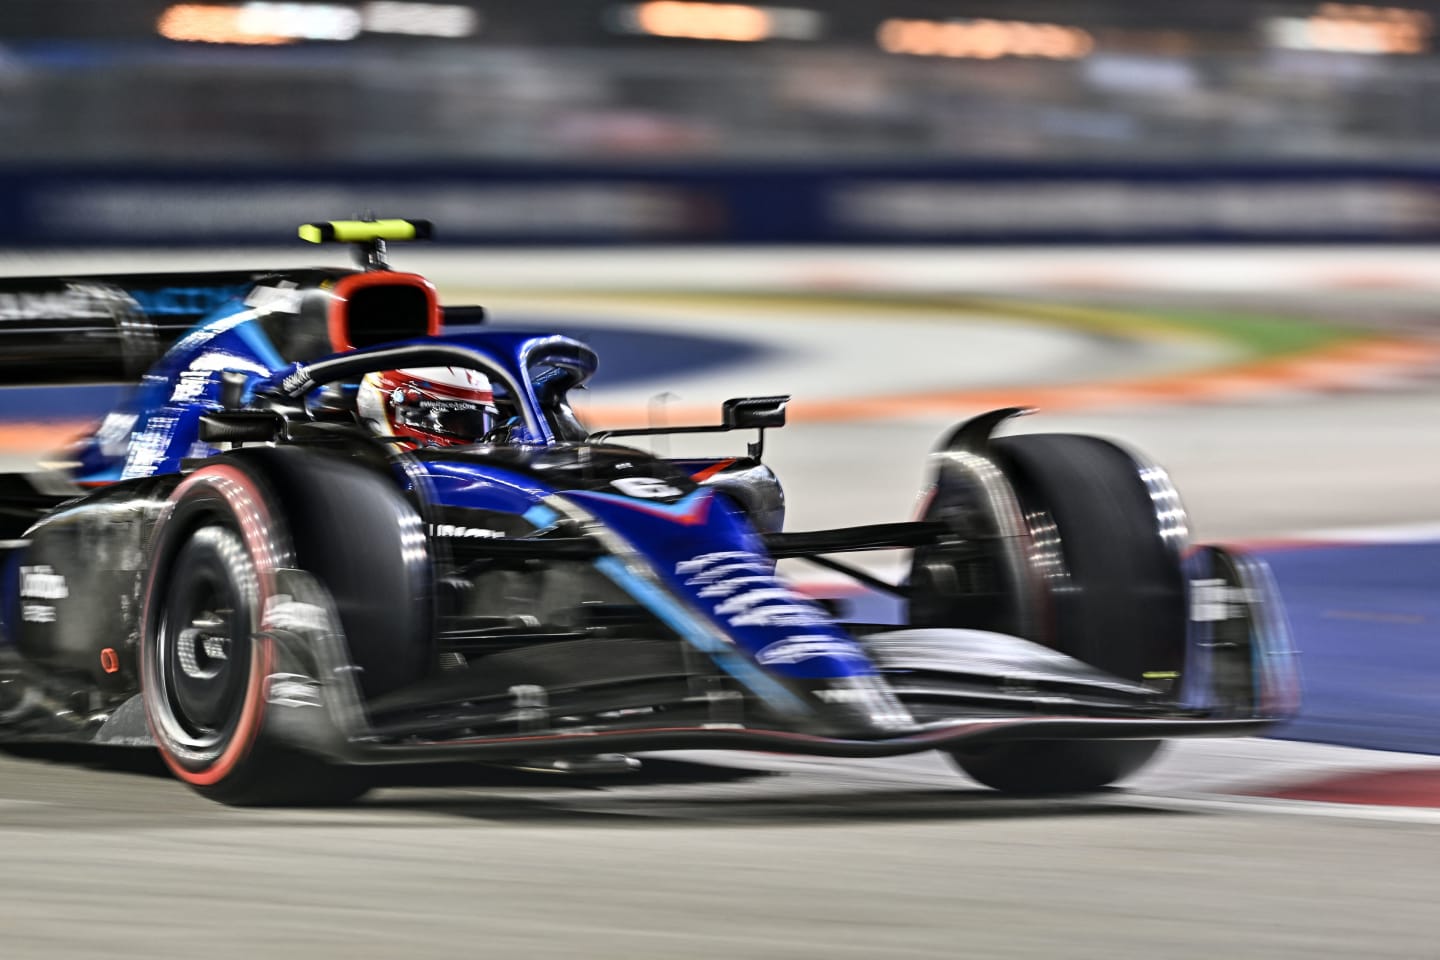 Williams' Canadian driver Nicholas Latifi drives during a practice session ahead of the Formula One Singapore Grand Prix night race at the Marina Bay Street Circuit in Singapore on September 30, 2022. (Photo by Lillian SUWANRUMPHA / AFP) (Photo by LILLIAN SUWANRUMPHA/AFP via Getty Images)